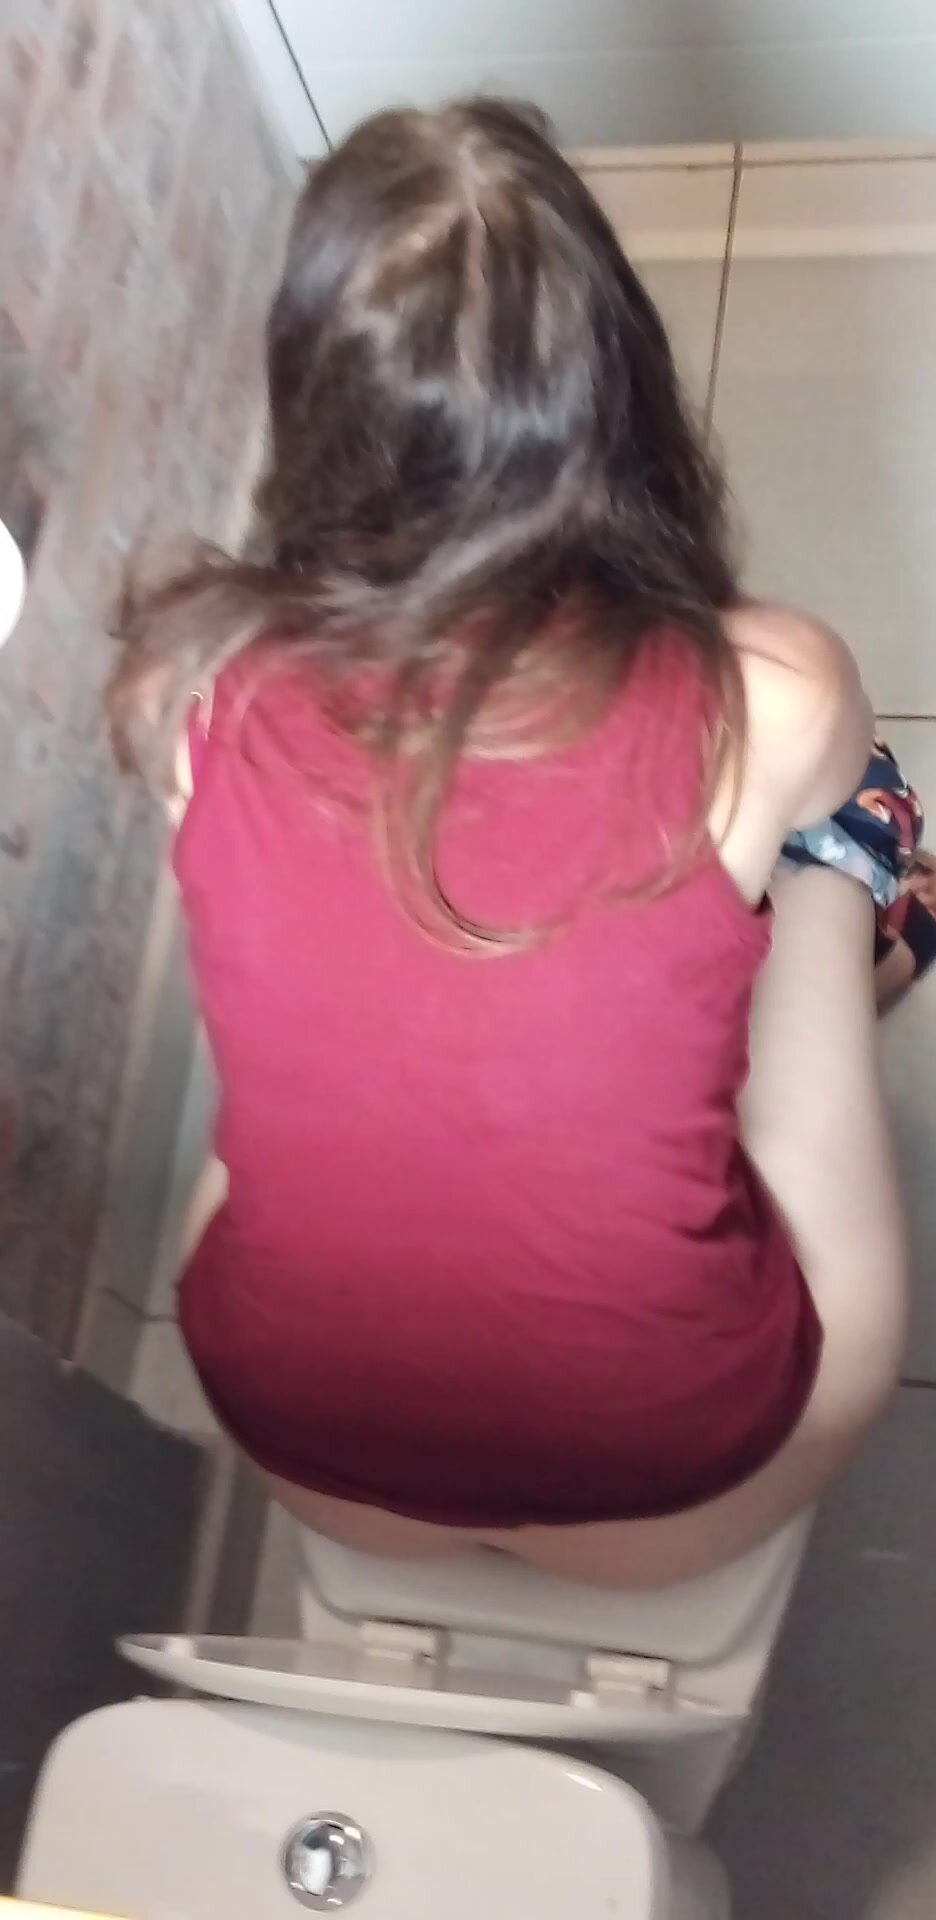 Brunette haired lady shitting in toilet